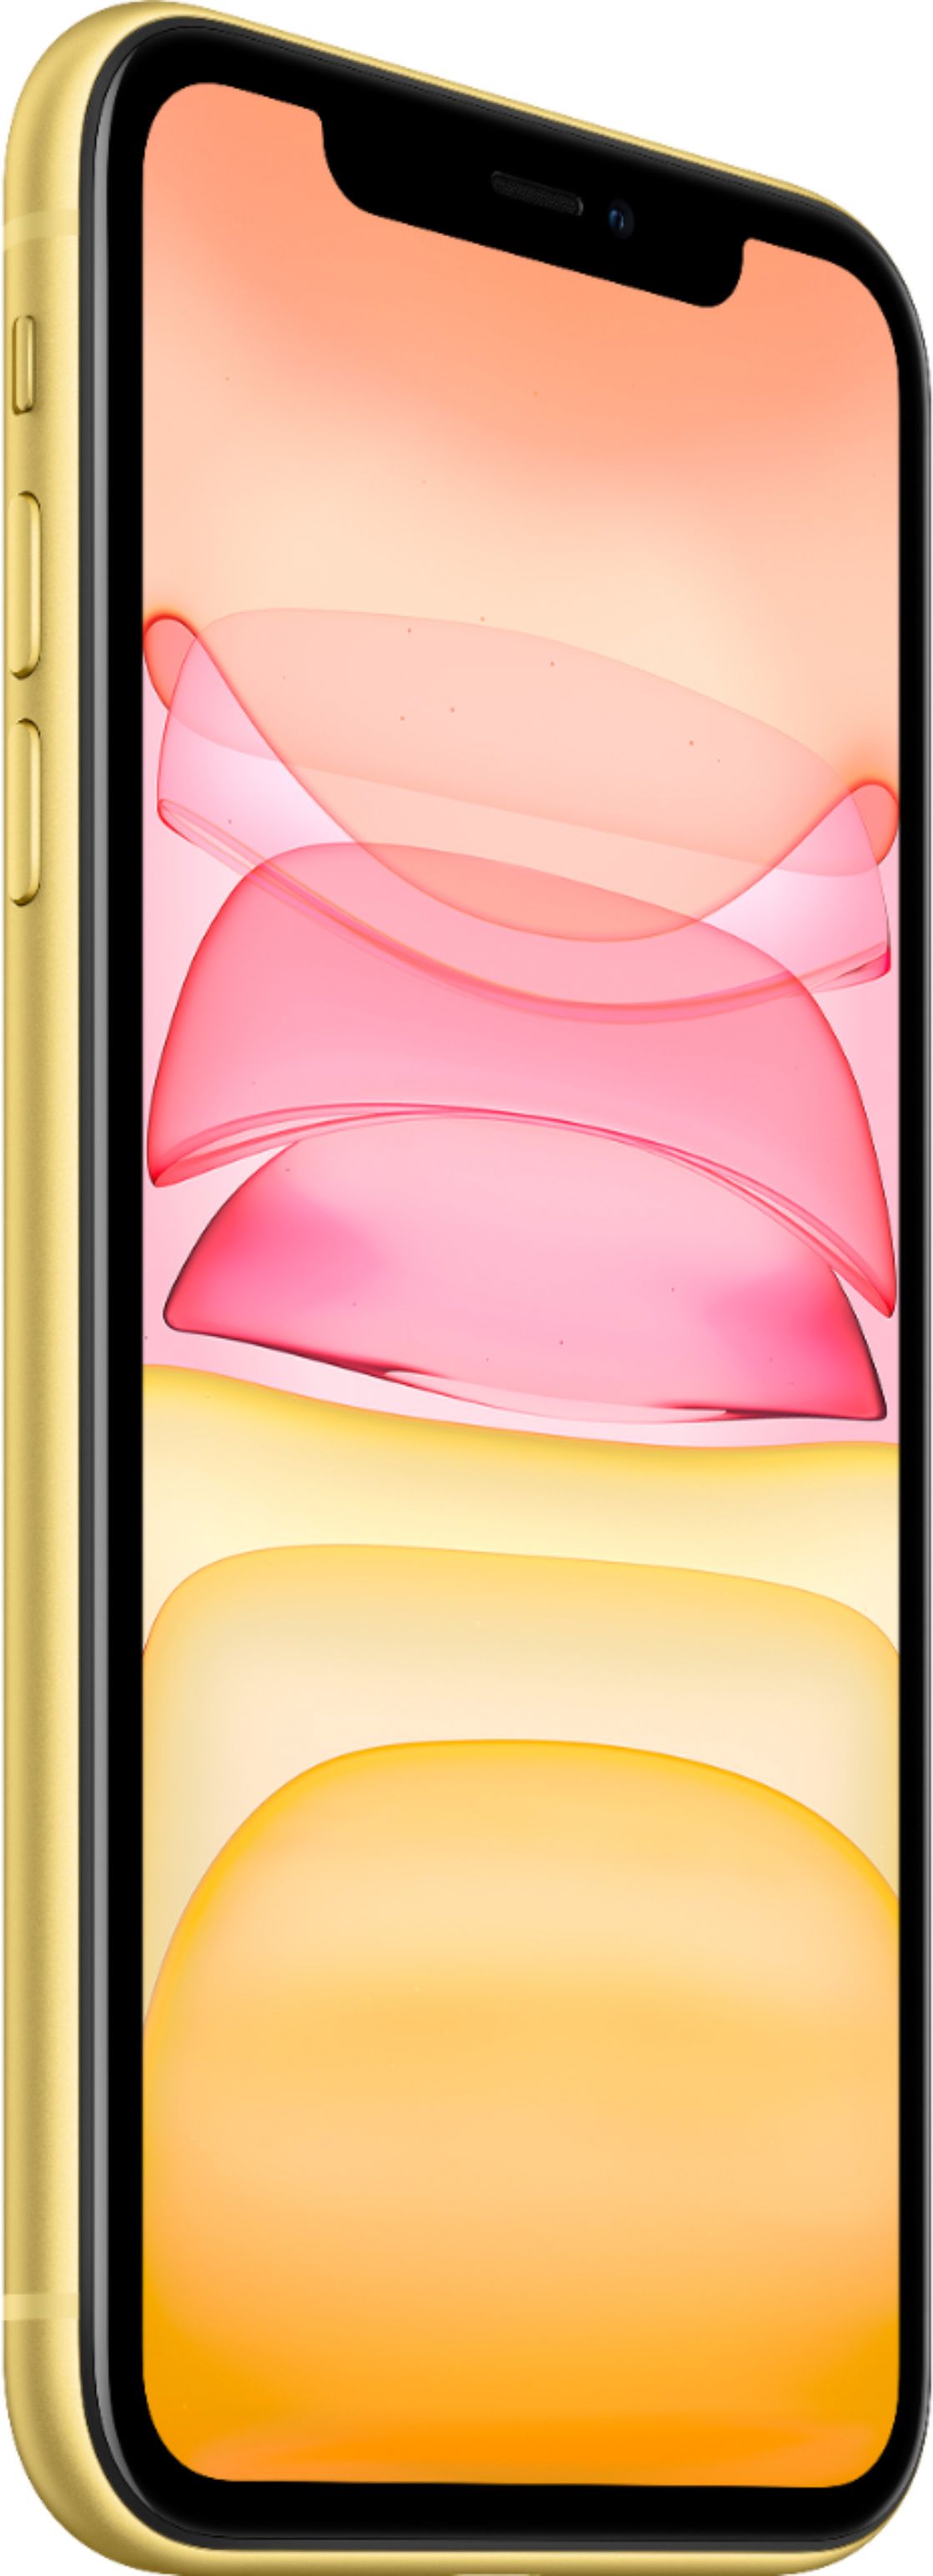 Best Buy: Apple iPhone 11 256GB Yellow (AT&T) MWLP2LL/A